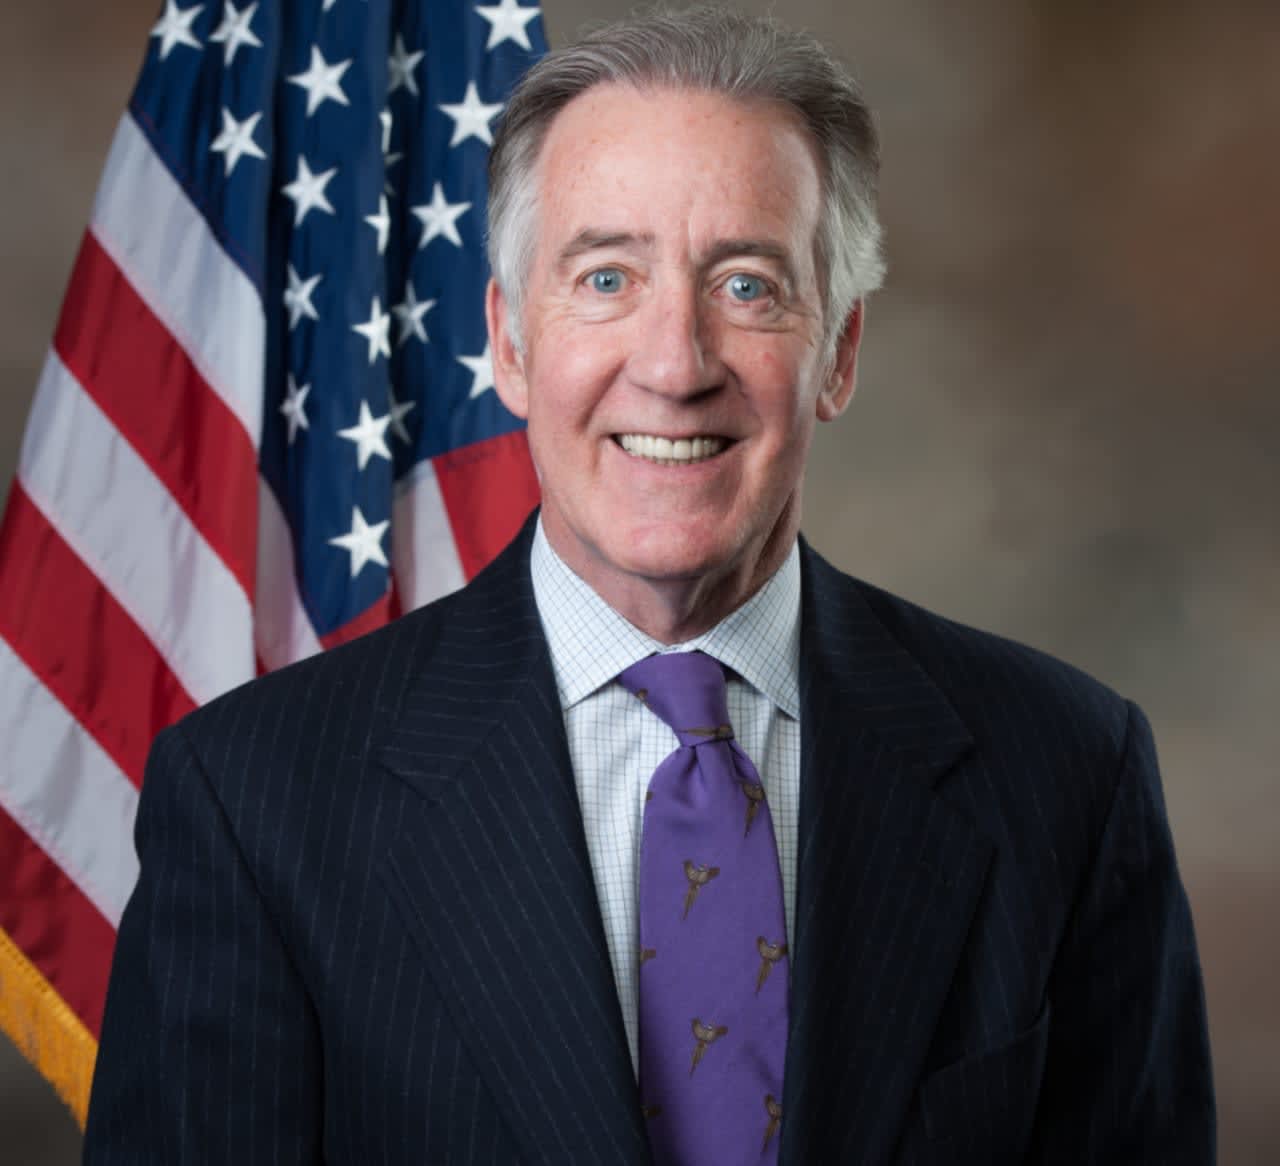 Local TV channels have received cease and desist letters by an attorney representing Congressman Richard Neal over the broadcasting of a political ad Neal's team says is "false" and “defamatory.”